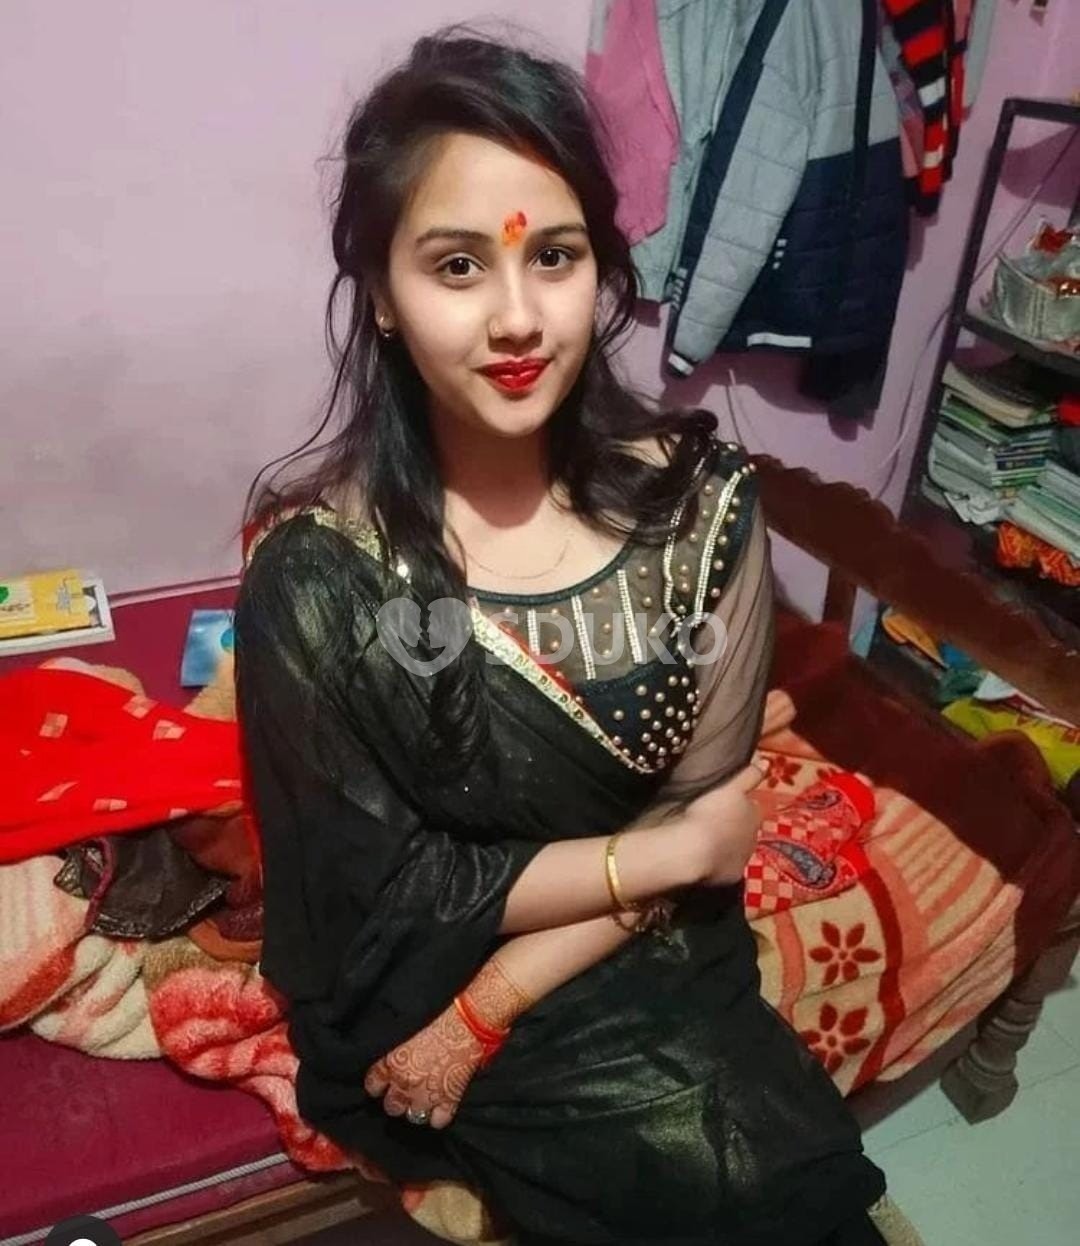 Miyapur_TODAY LOW PRICE_GENUINE SERVICE ALL TYPE GIRLS AVAILABLE_NEW GOOD LOOKING STAFF AVAILABLE CALL ME